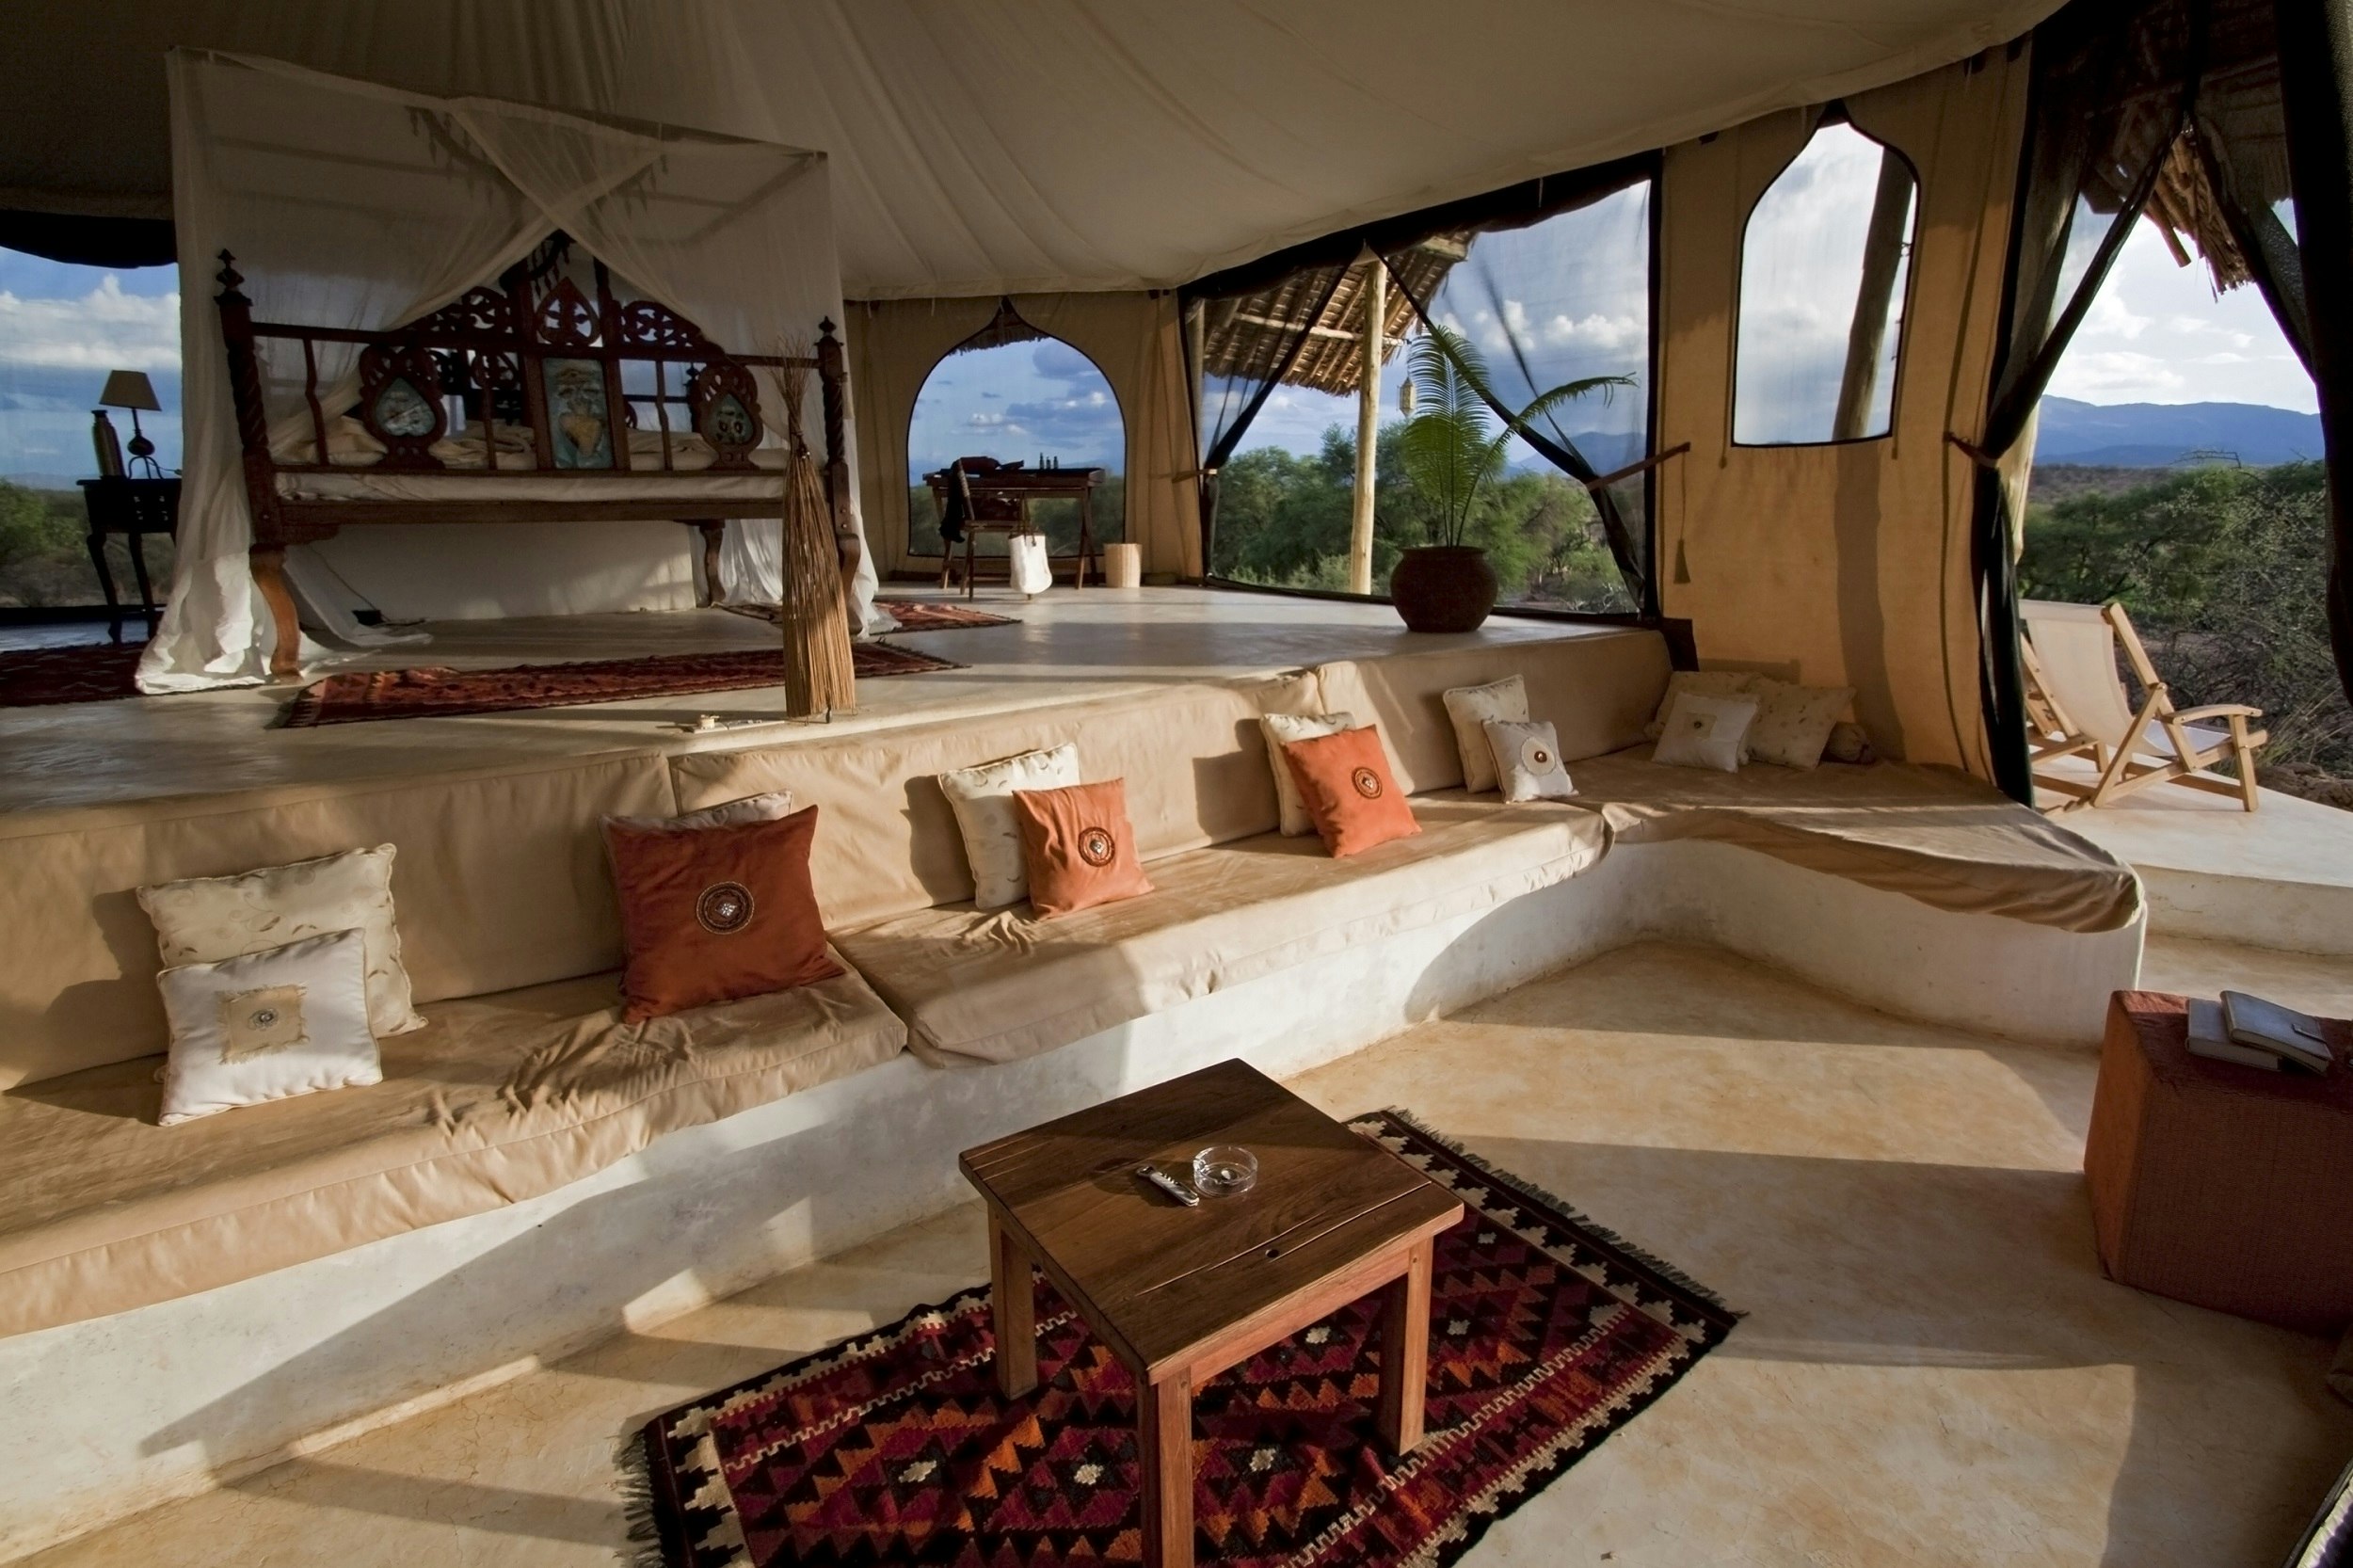 The vast, multi-levelled interior of a safari tent in Kenya; polished tan-coloured concrete floors with rugs are surrounded by a built-in seating area, which flows onto an upper level with a four-poster bed.